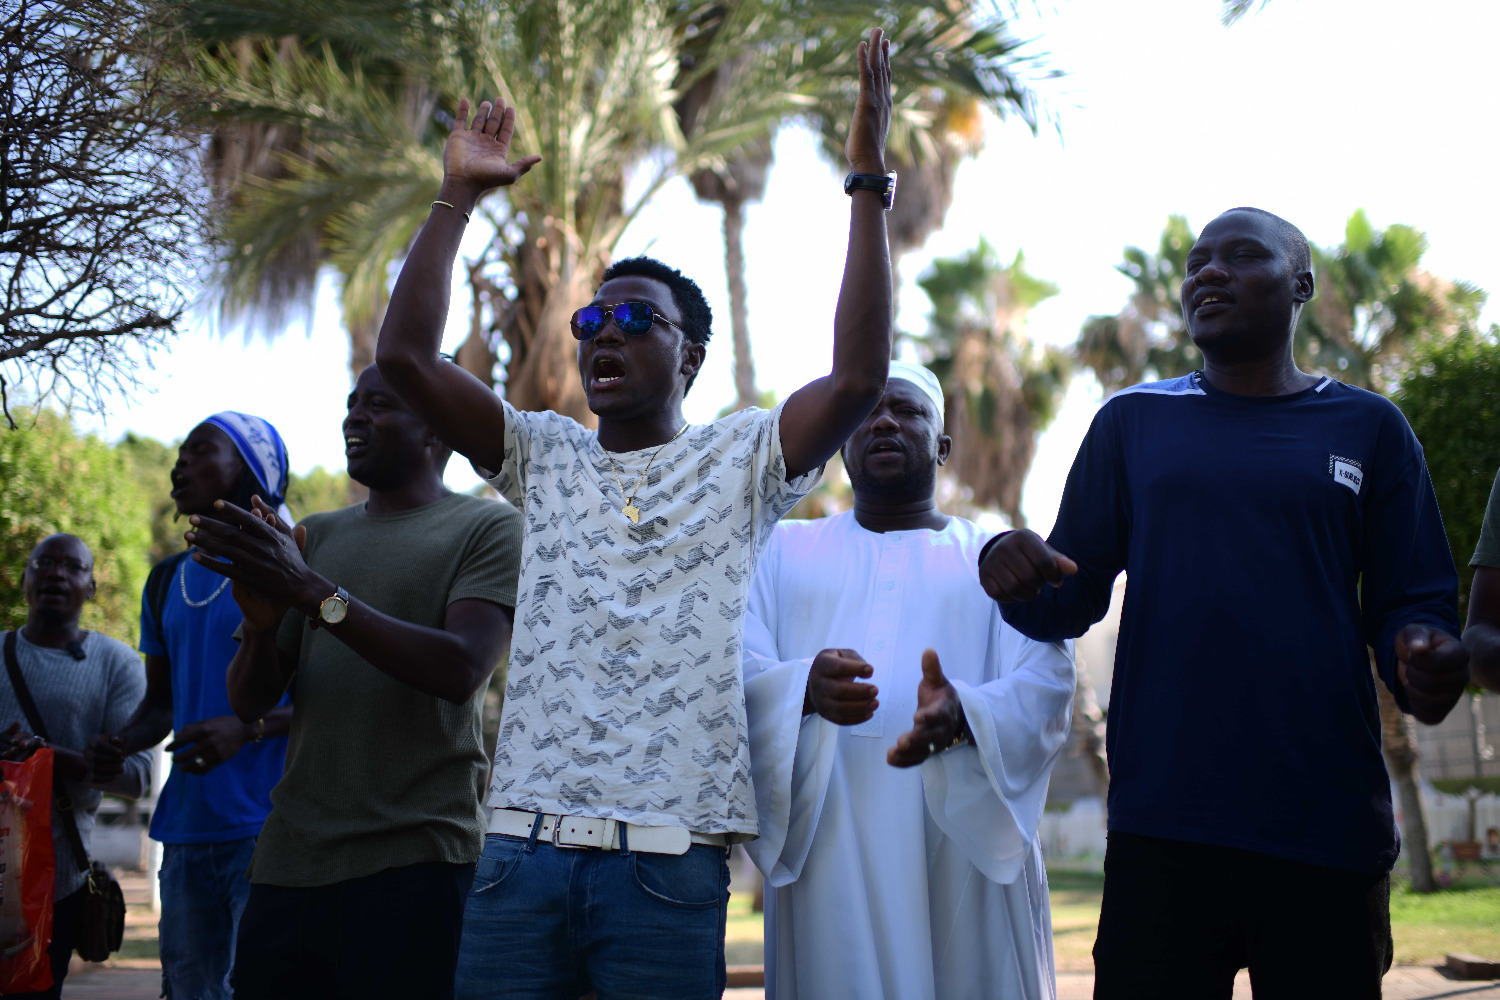 Israel issues temporary residence permits to 1,000 Sudanese refugees